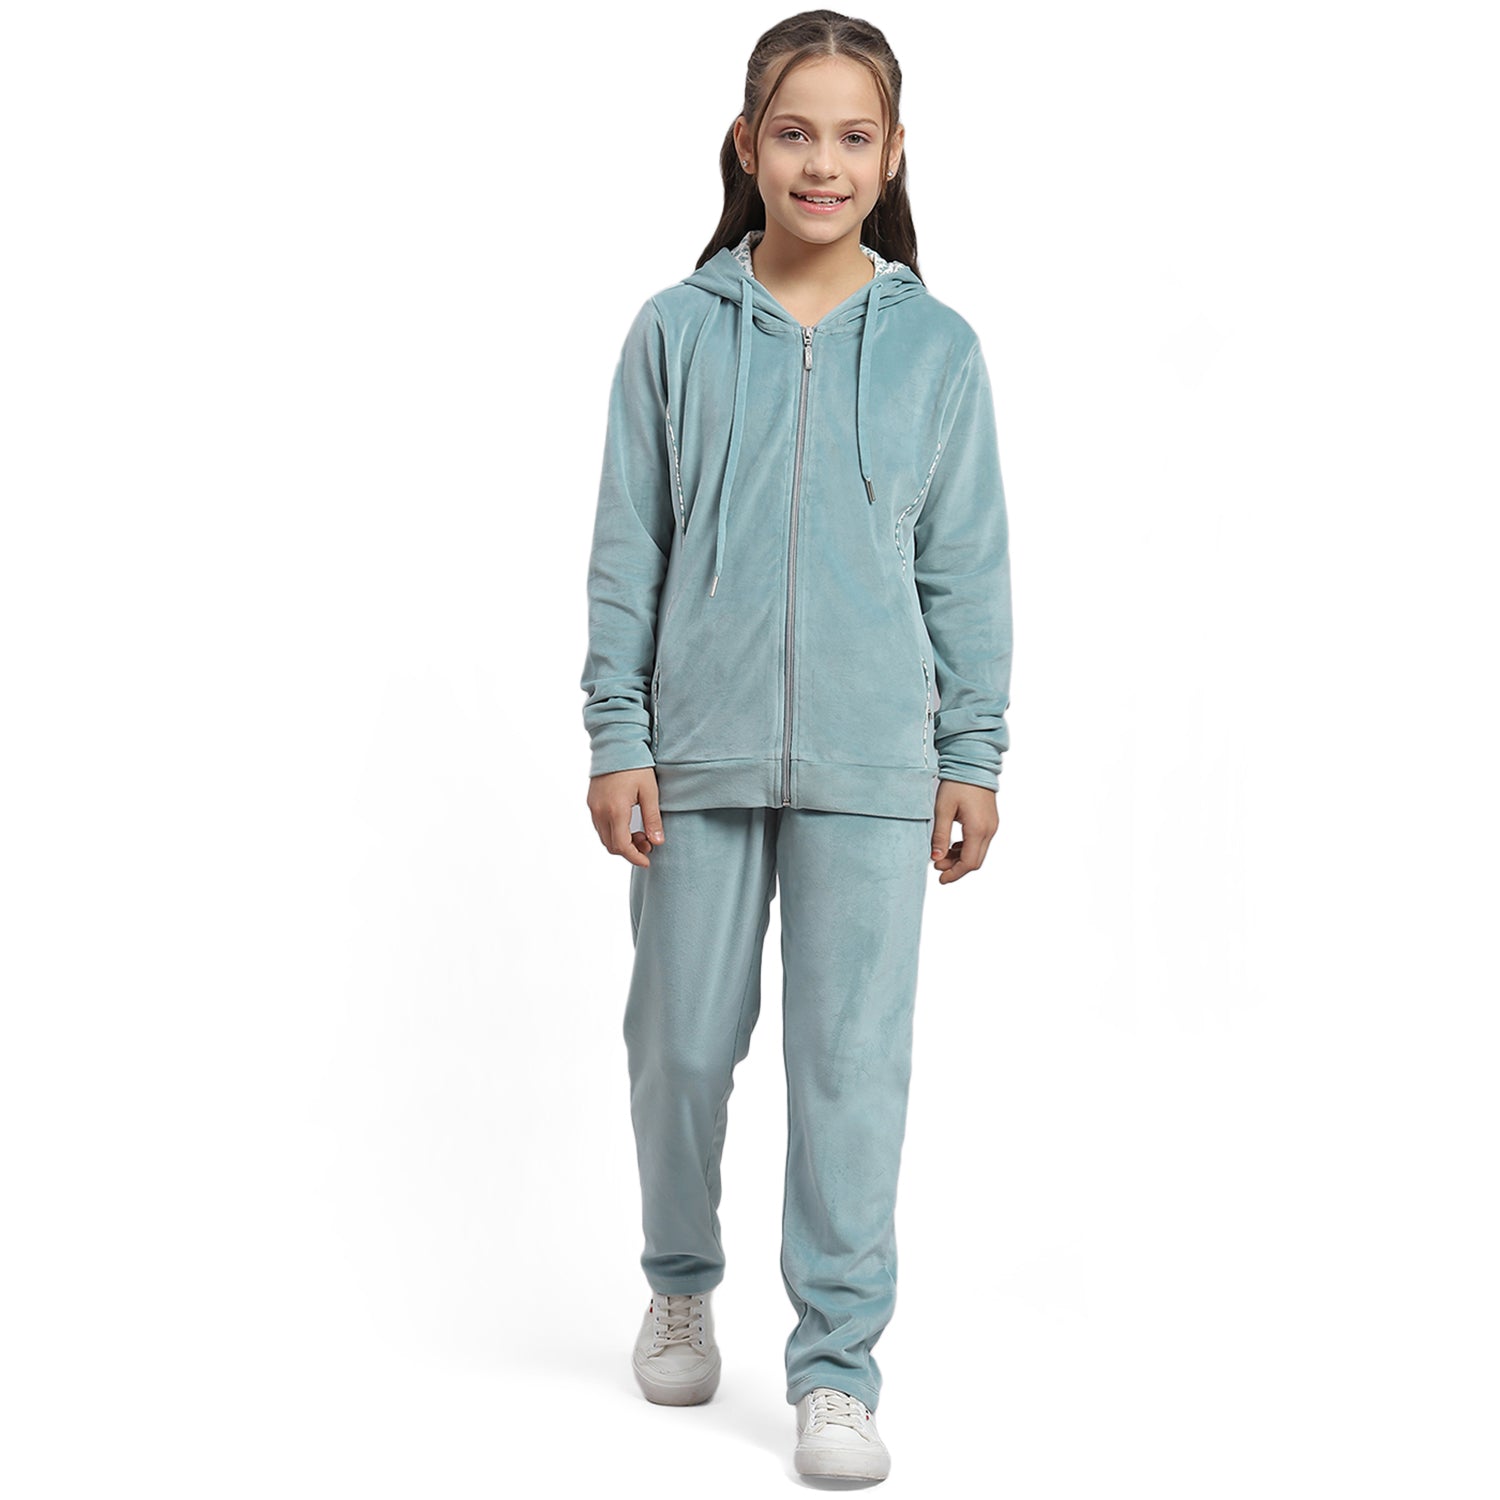 Girls Teal Blue Solid Hooded Full Sleeve Tracksuit